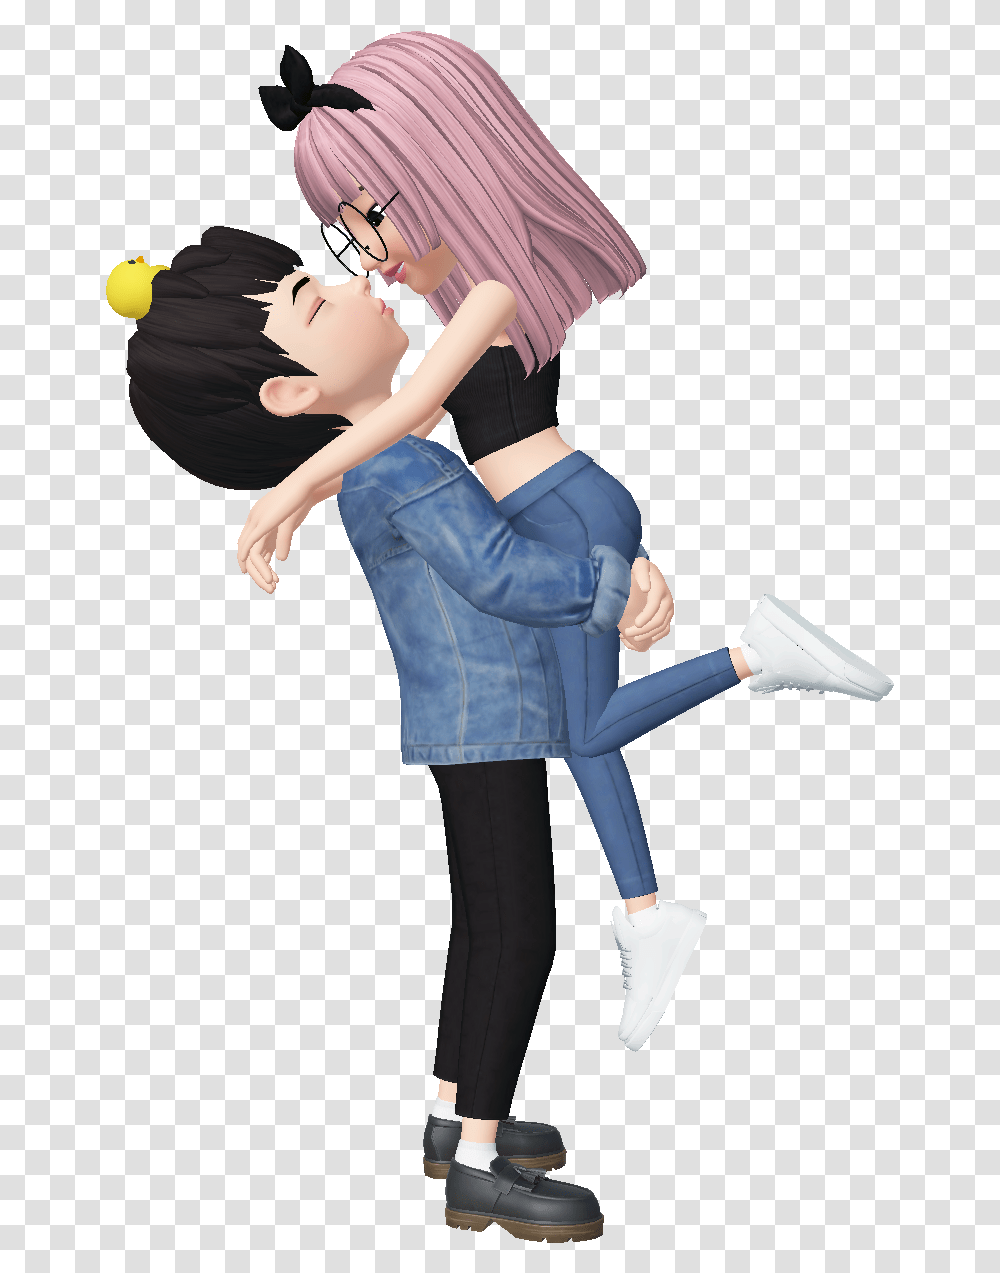 Zepeto Cute Couple Boy Girl Freetoedit Cute Boy And Girl Couple Cartoon Hd, Dance Pose, Leisure Activities, Person, Human Transparent Png